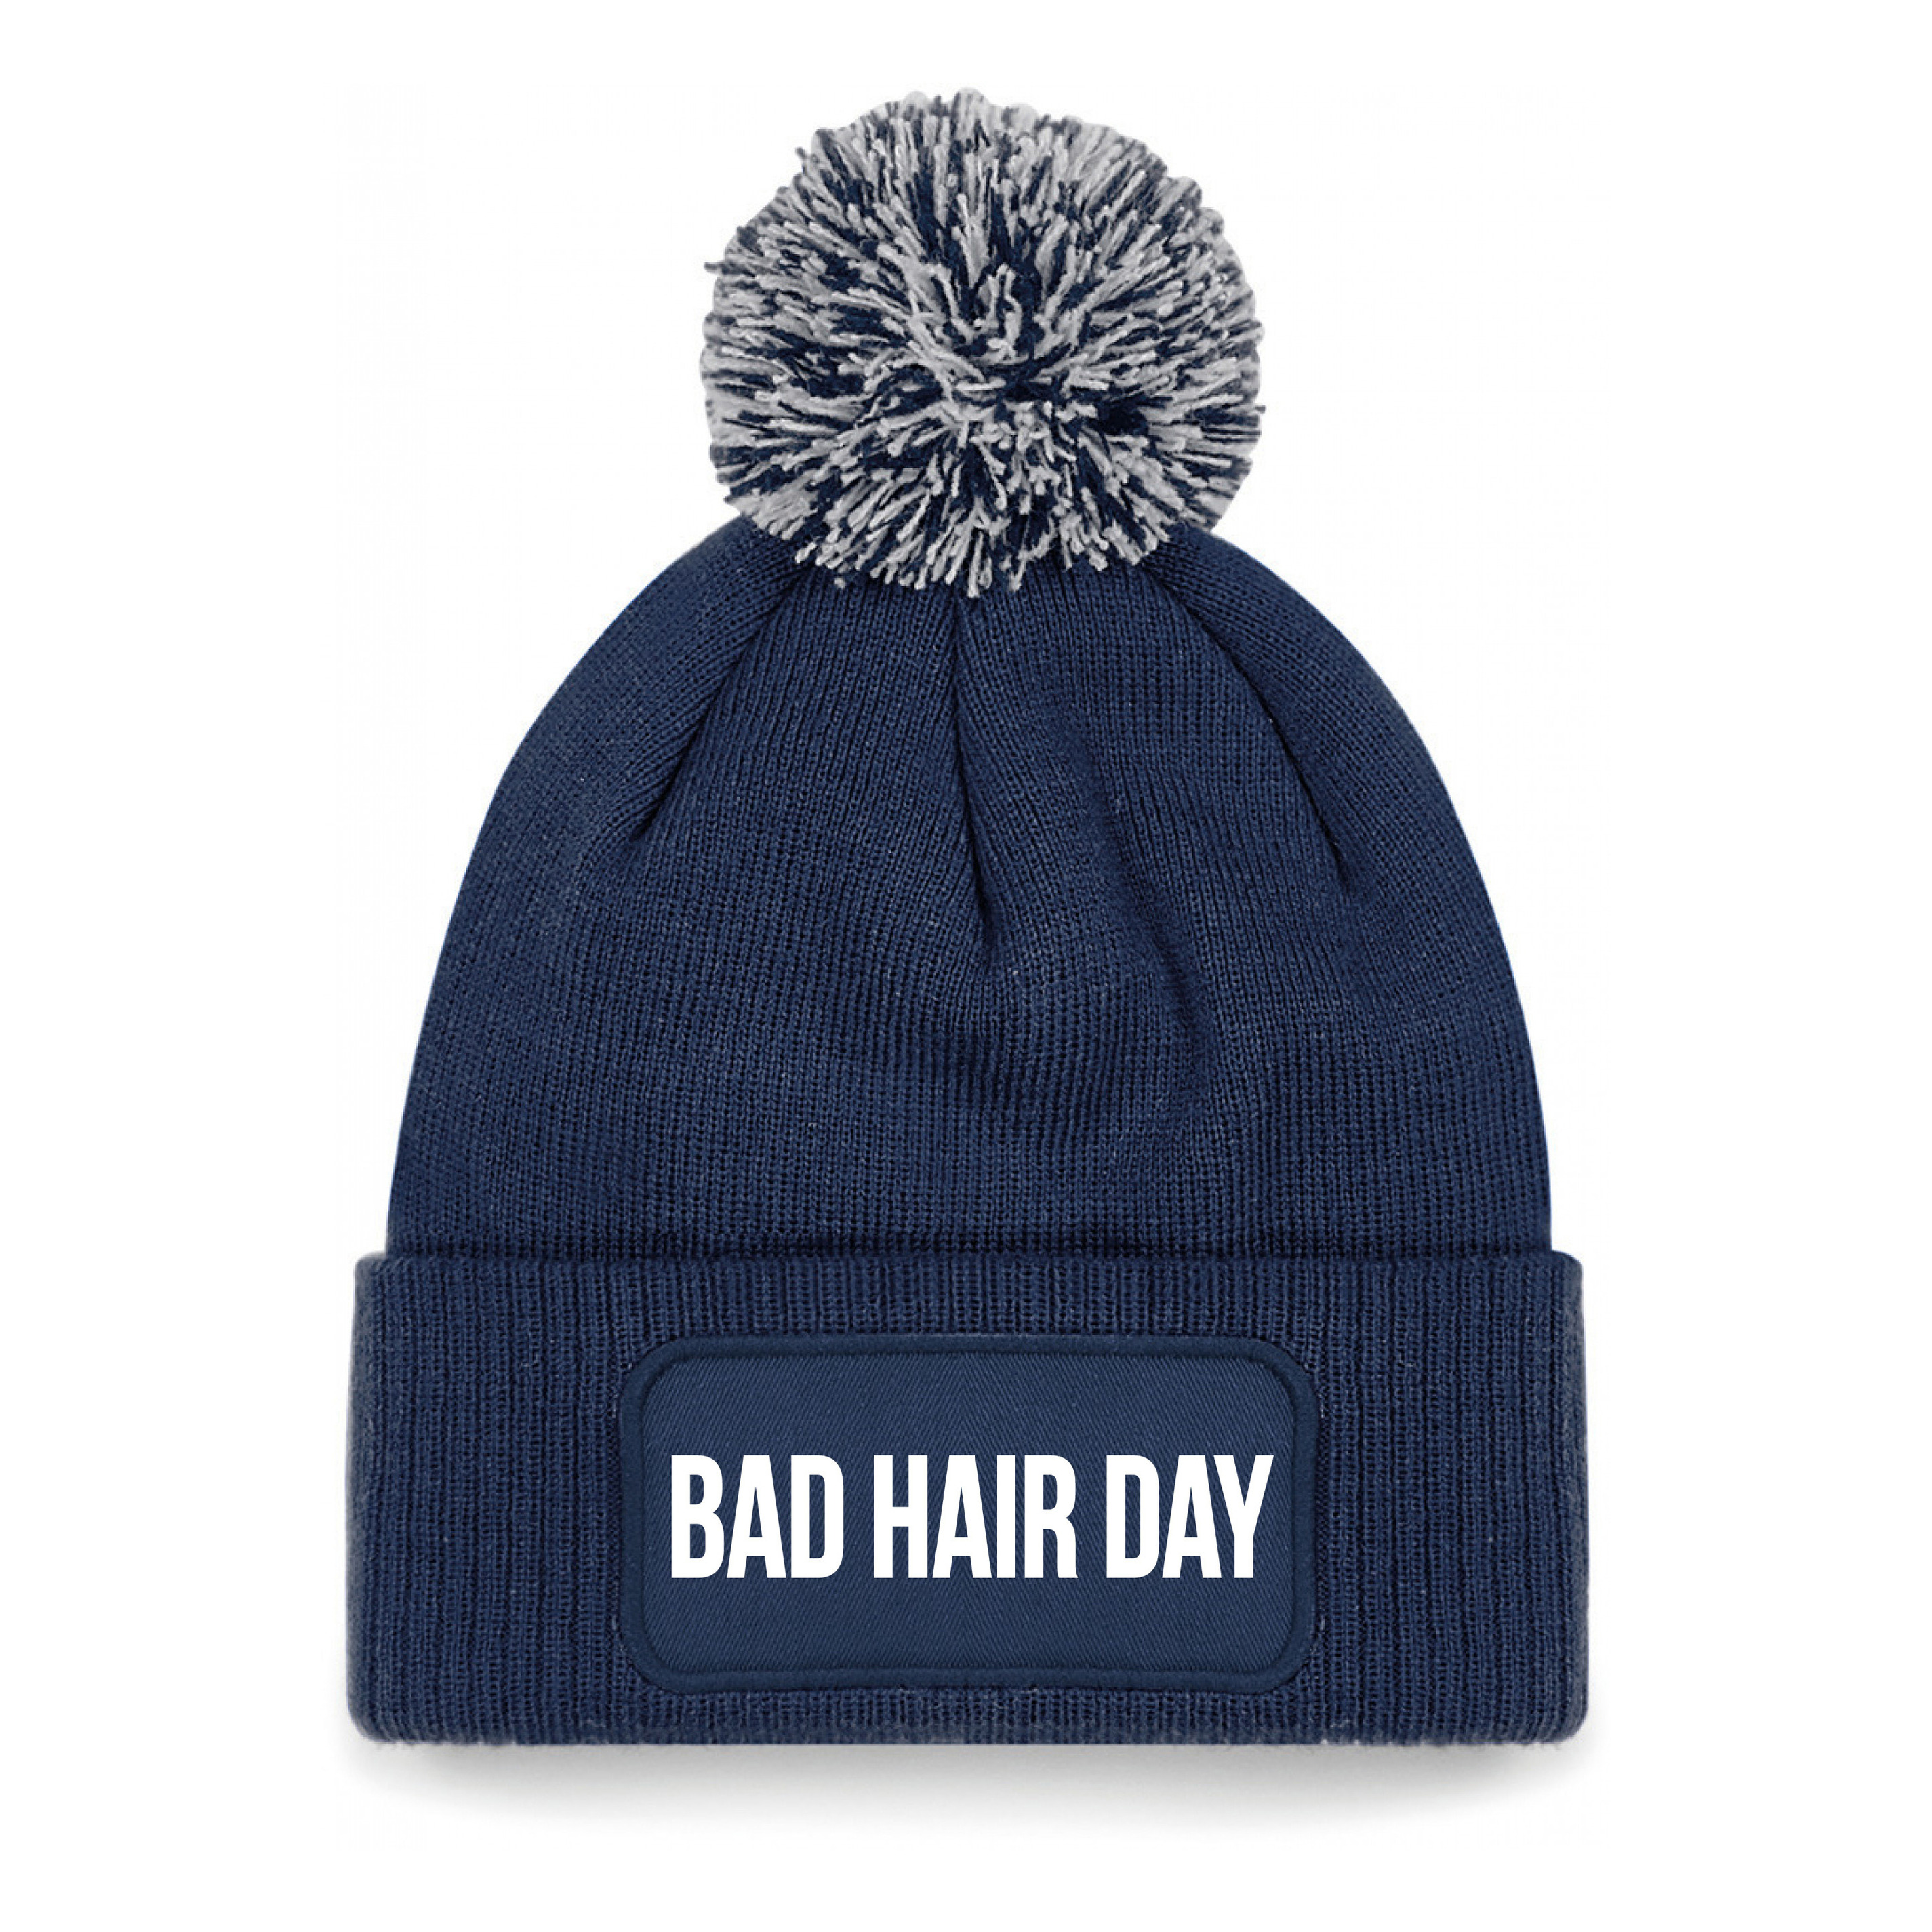 Bad hair day muts met pompon unisex one size Navy